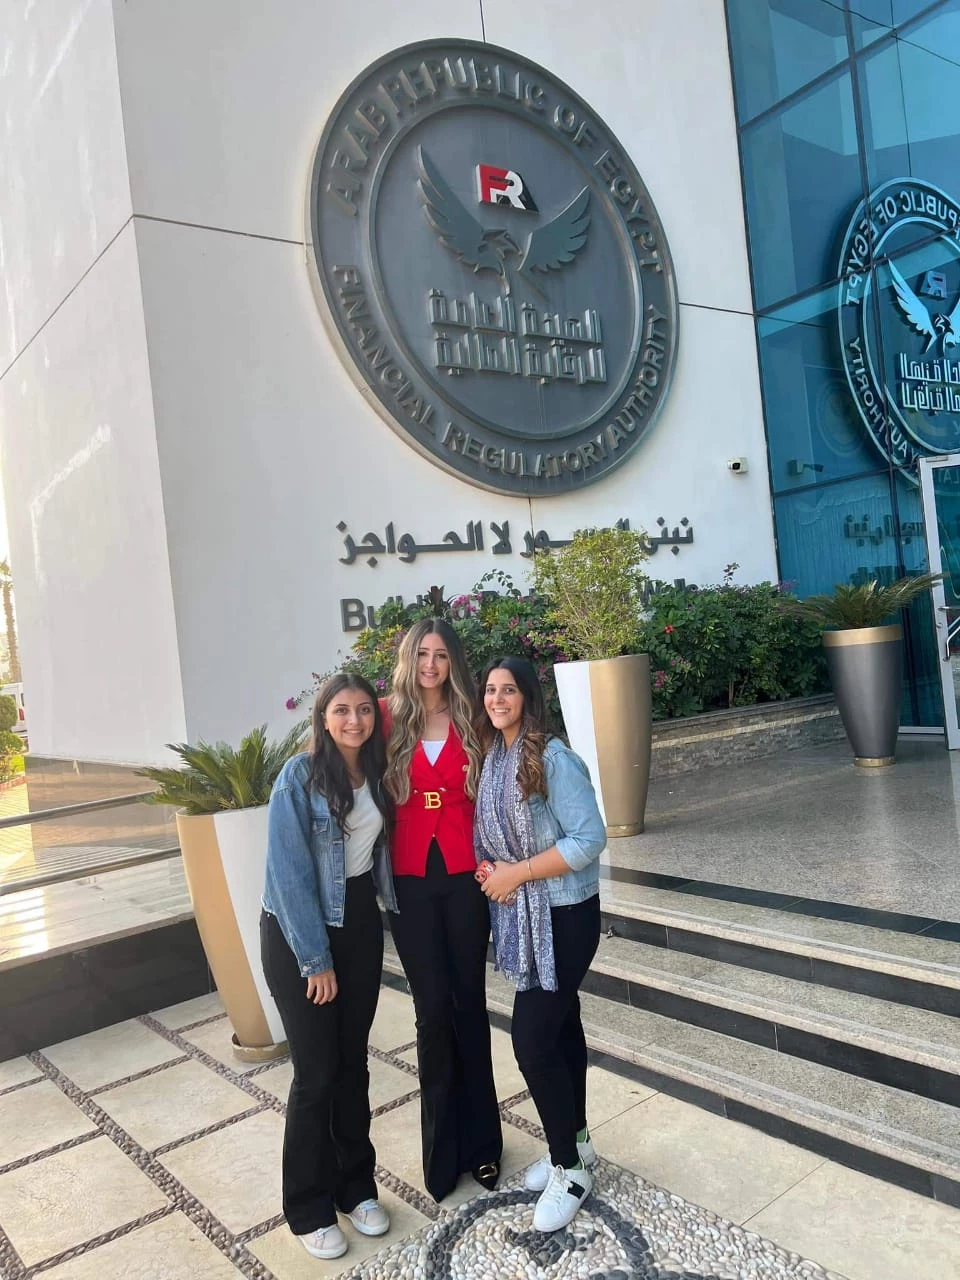 The Department of cultural and social activity in Miami organized a scientific trip to the headquarters of the General Authority for financial supervision in the smart village in Cairo on: 8/11/20238